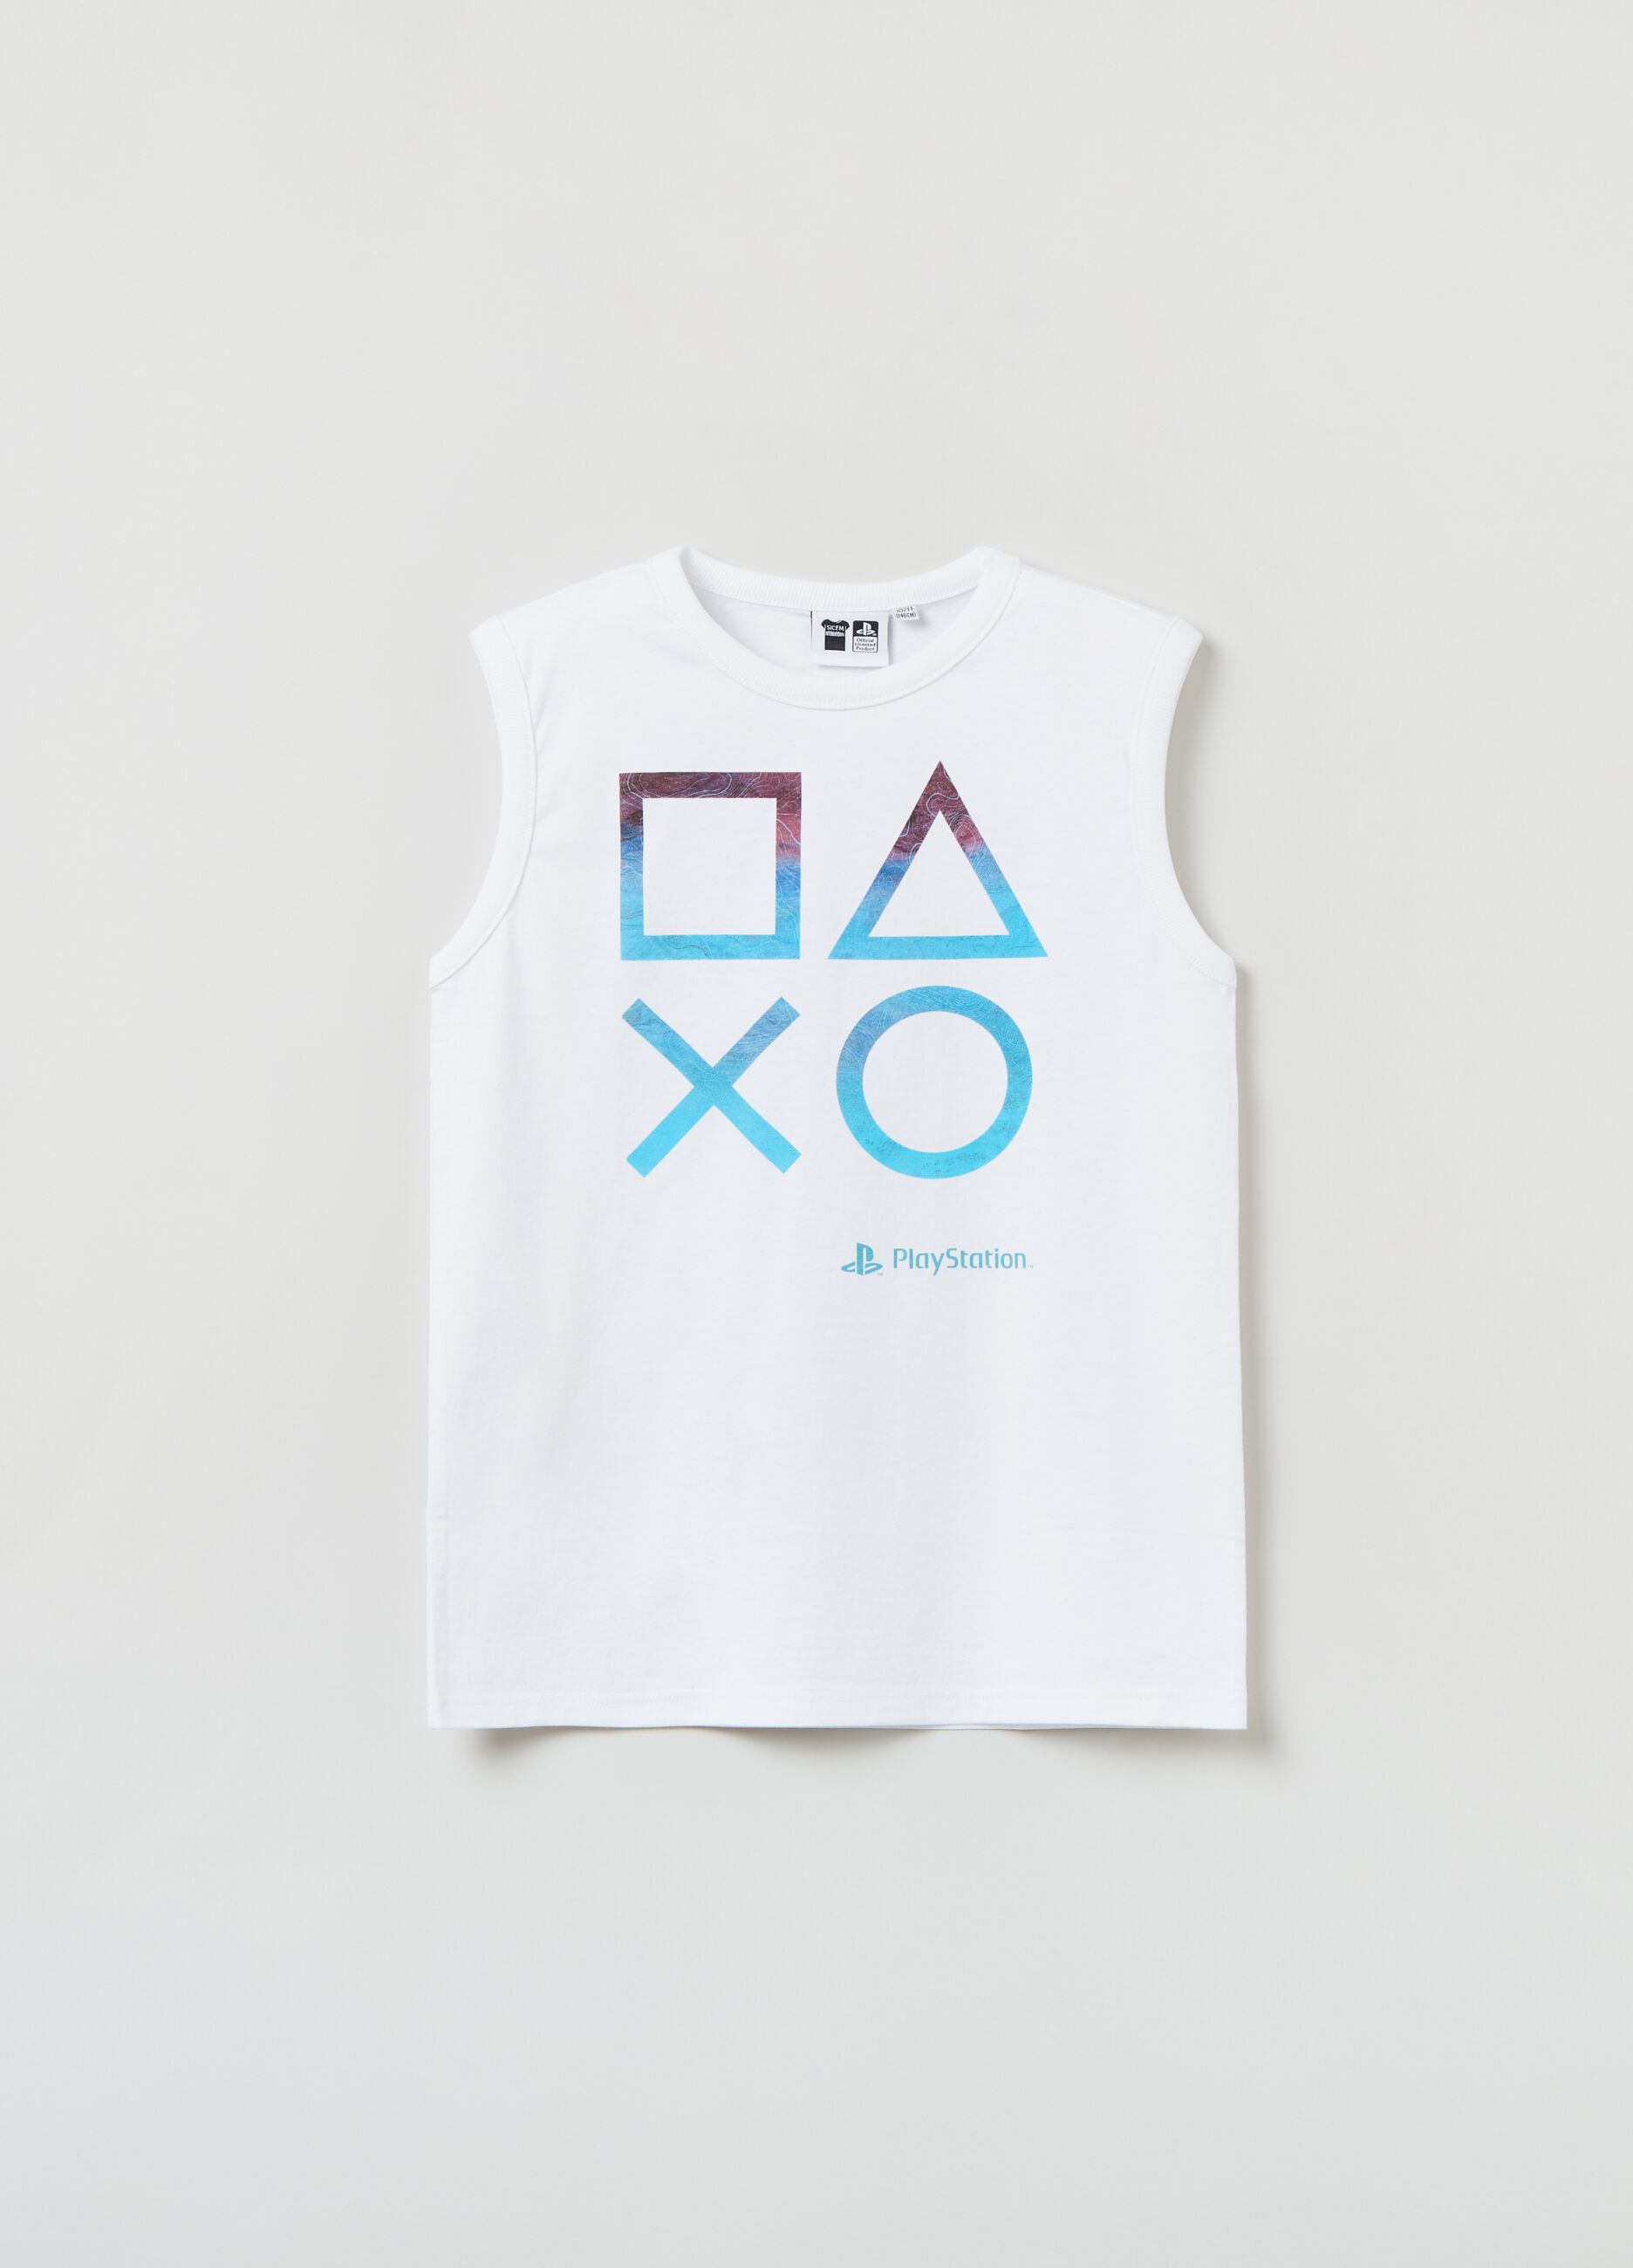 Cotton racerback vest with Sony PlayStation print